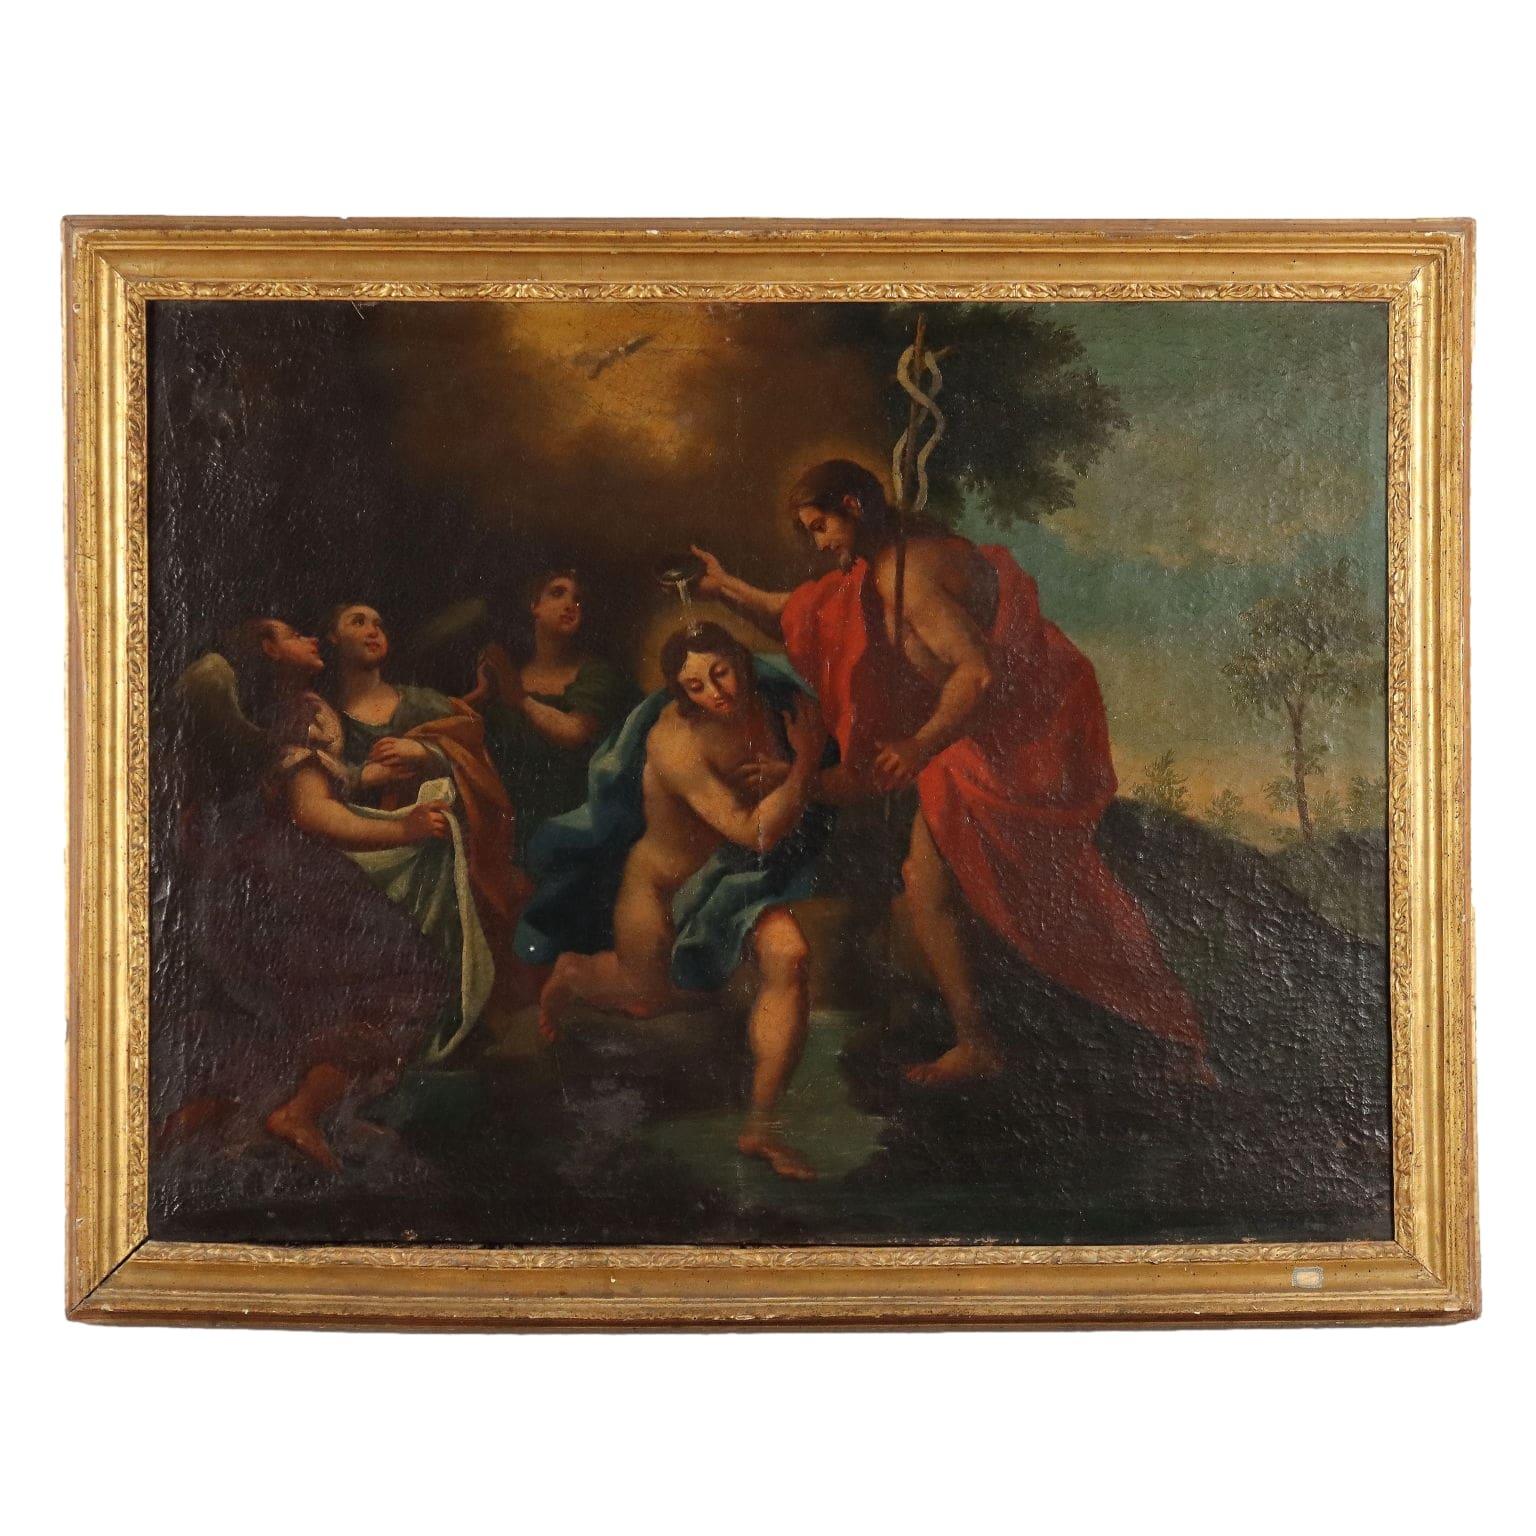 Unknown Figurative Painting - Painting The Baptism of Christ 17th century